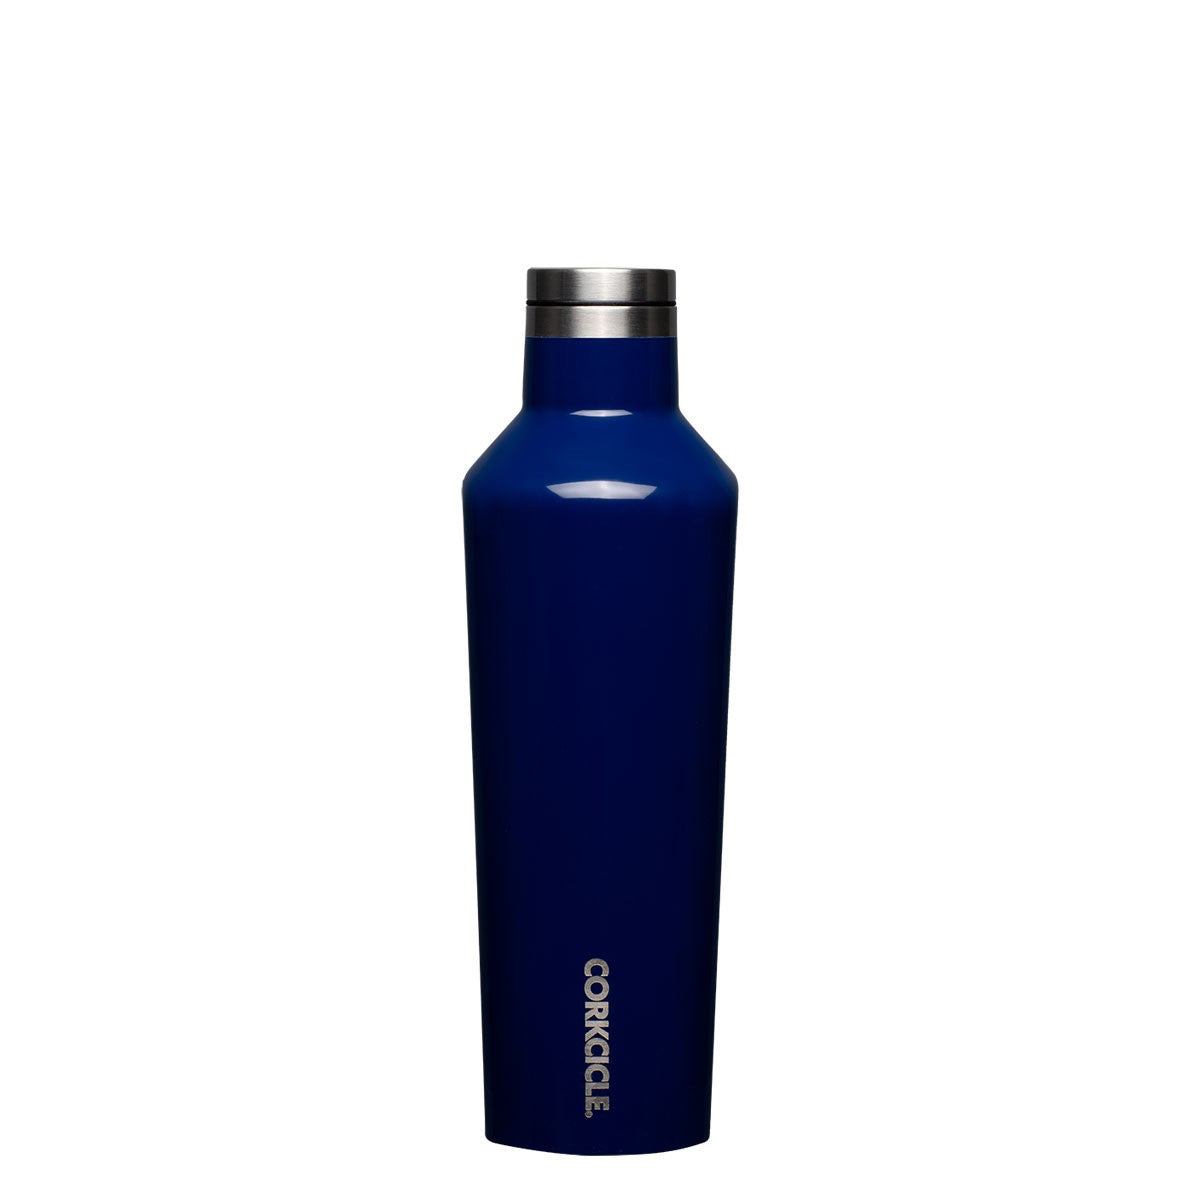 Corkcicle Canteen 16oz. Gloss Midnight Navy